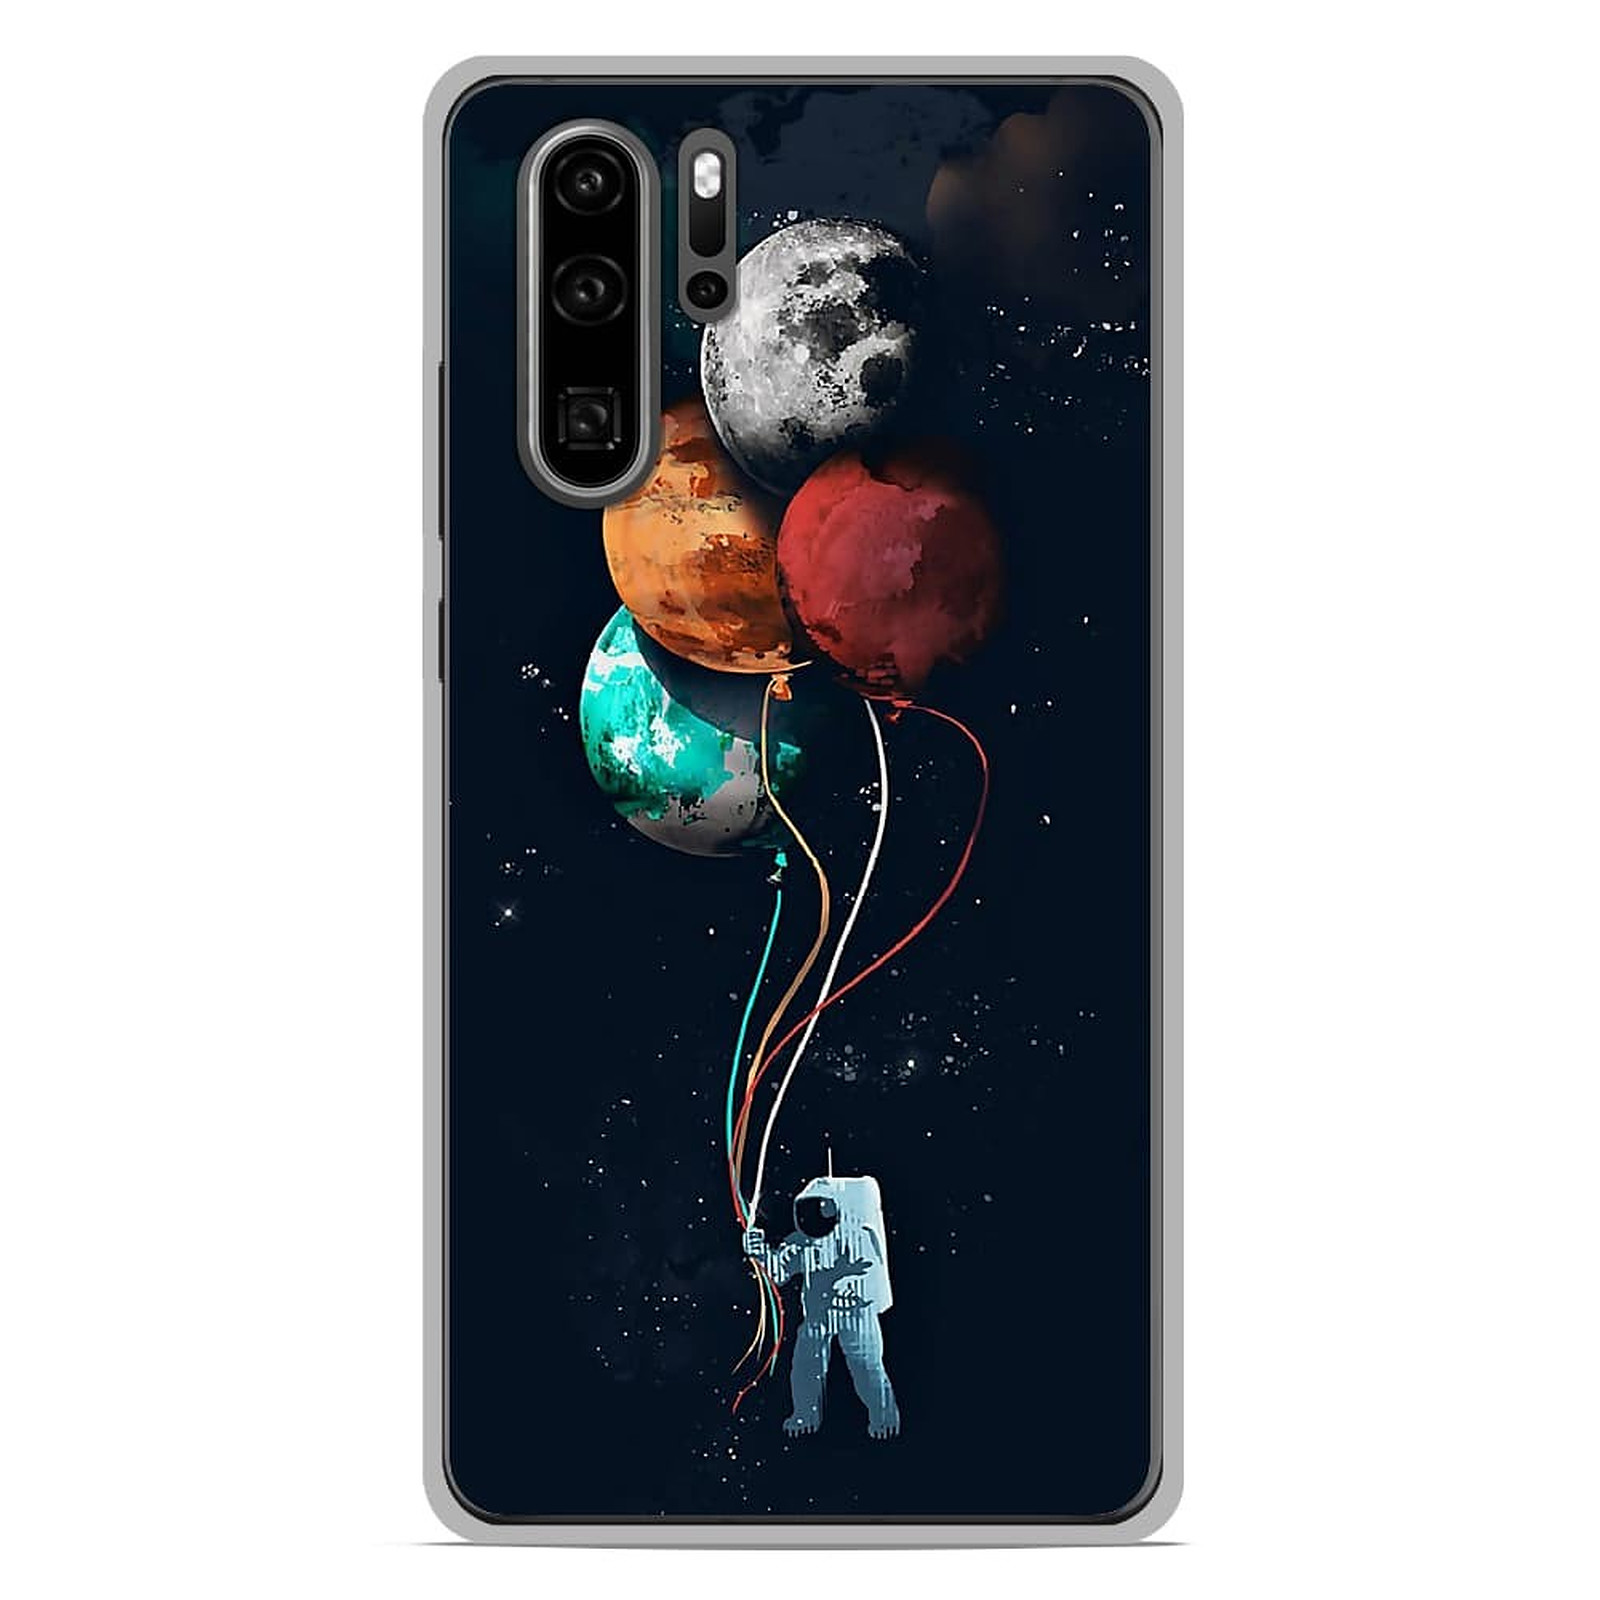 1001 Coques Coque silicone gel Huawei P30 Pro motif Cosmonaute aux Ballons - Coque telephone 1001Coques